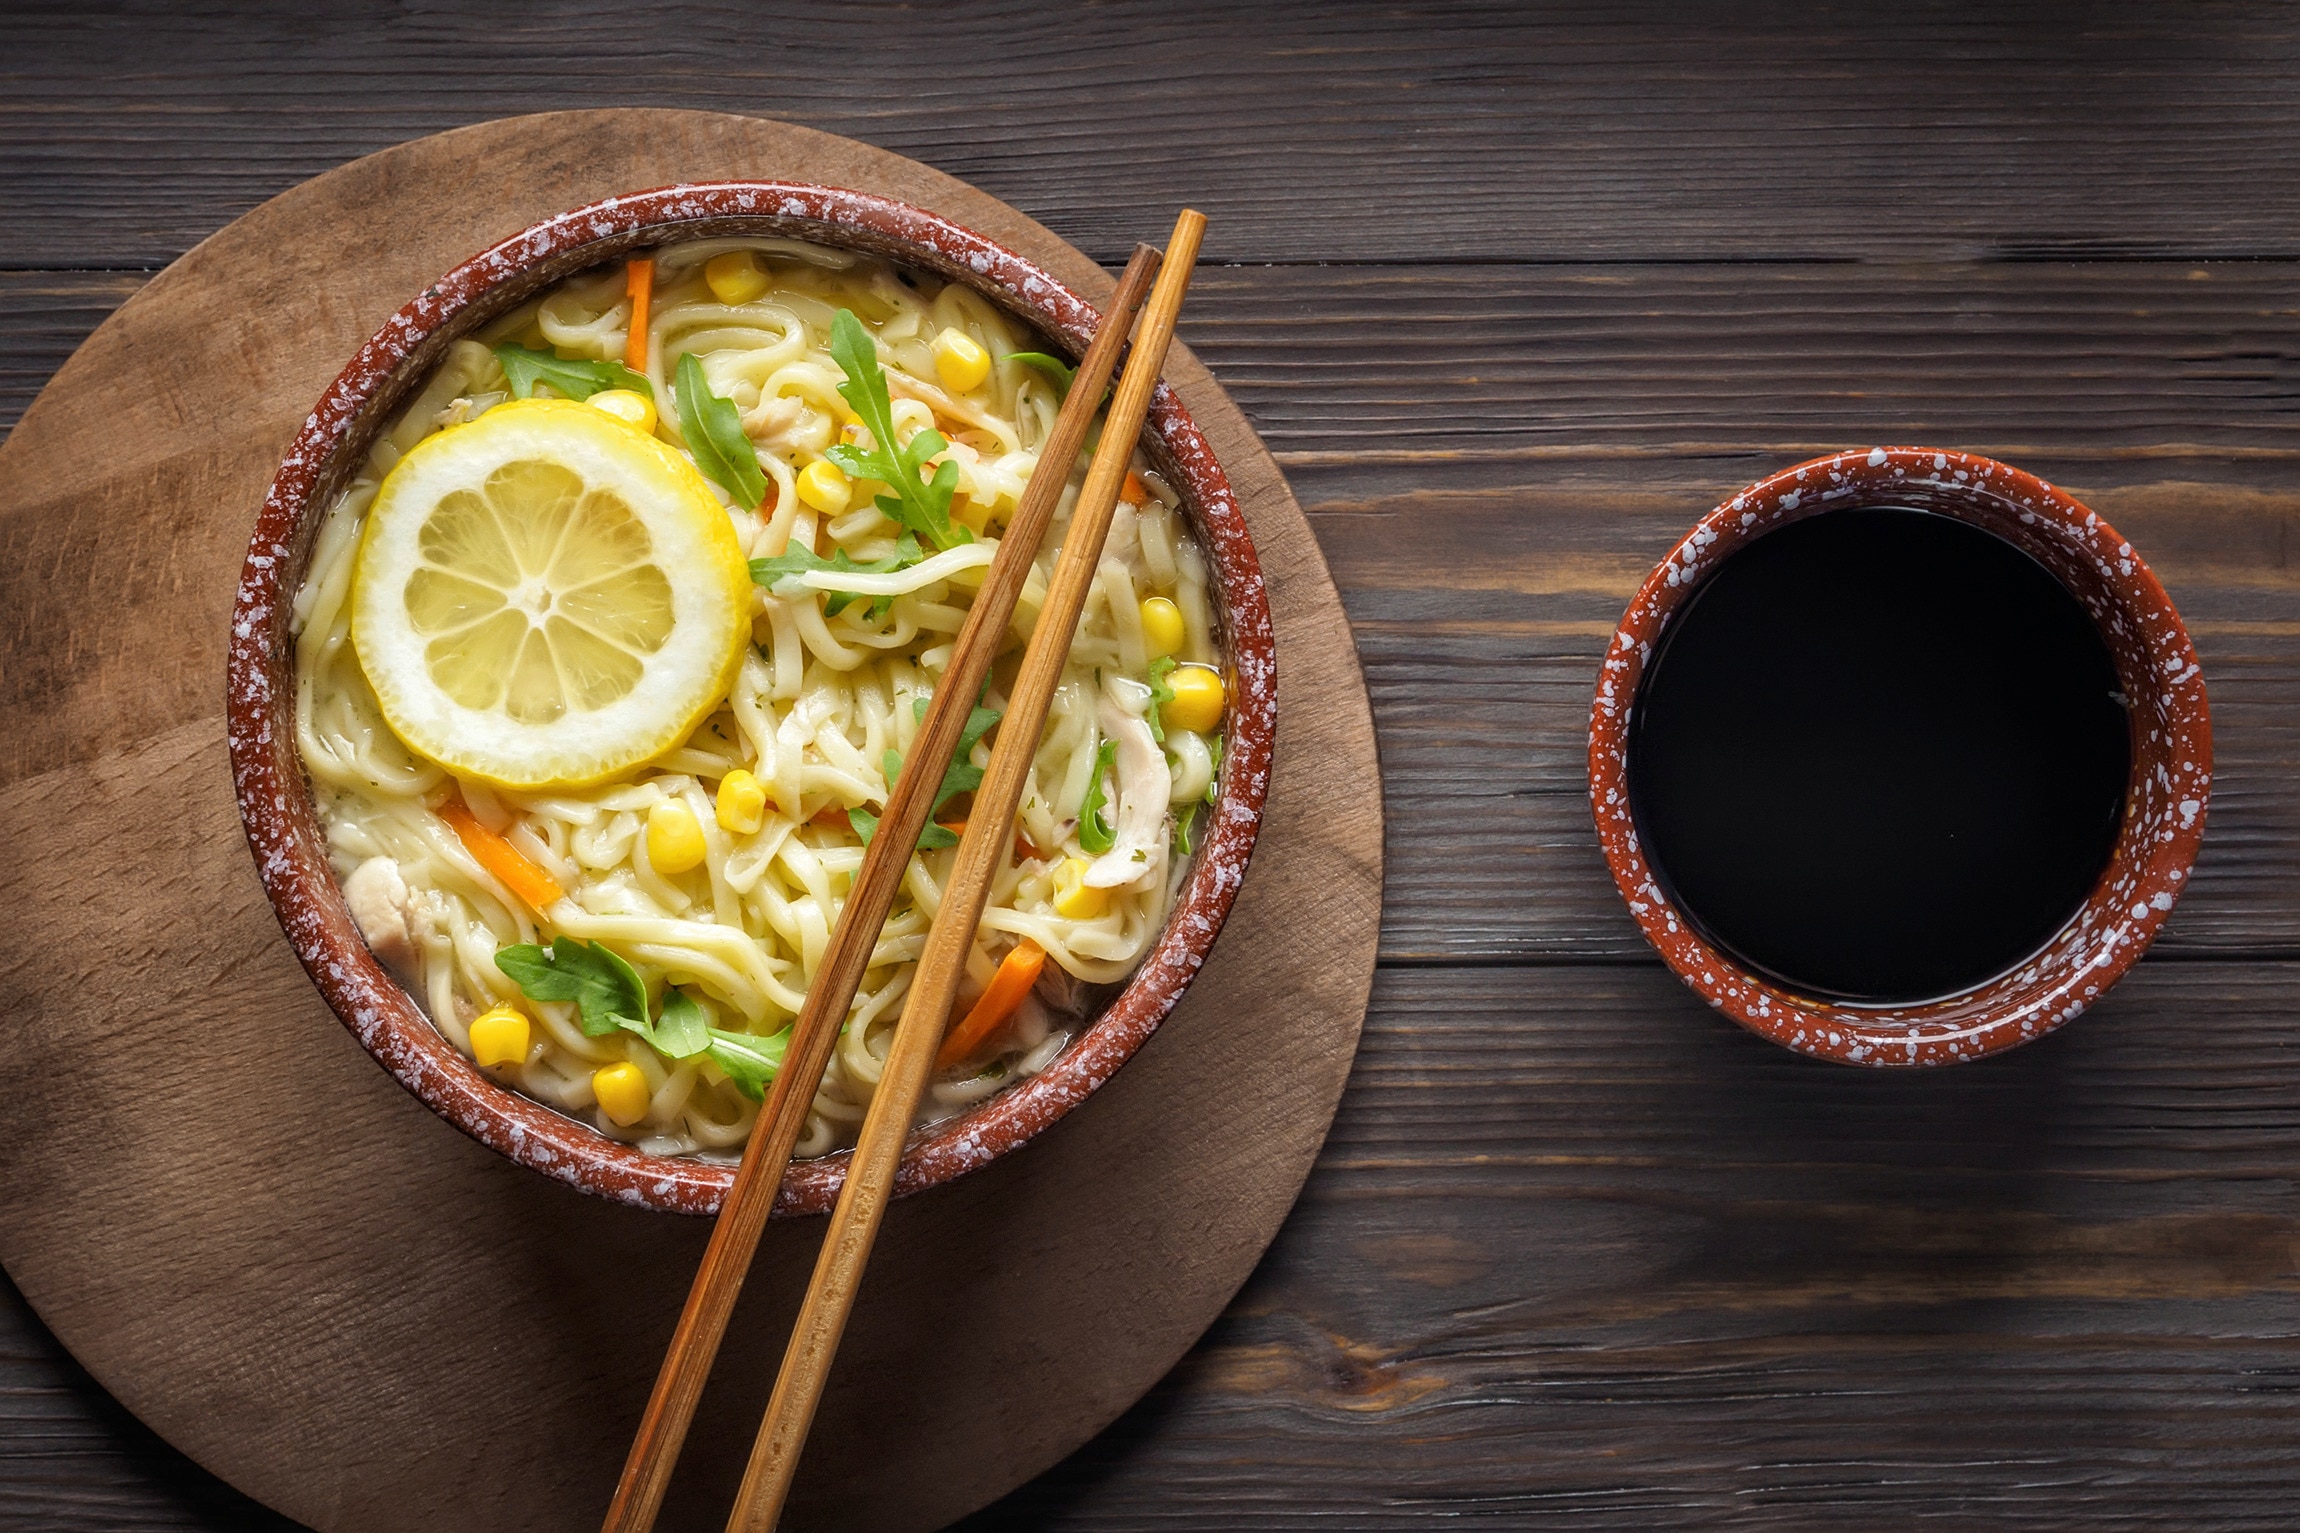 Crab and corn soup with noodles in a bowl, served with chopsticks